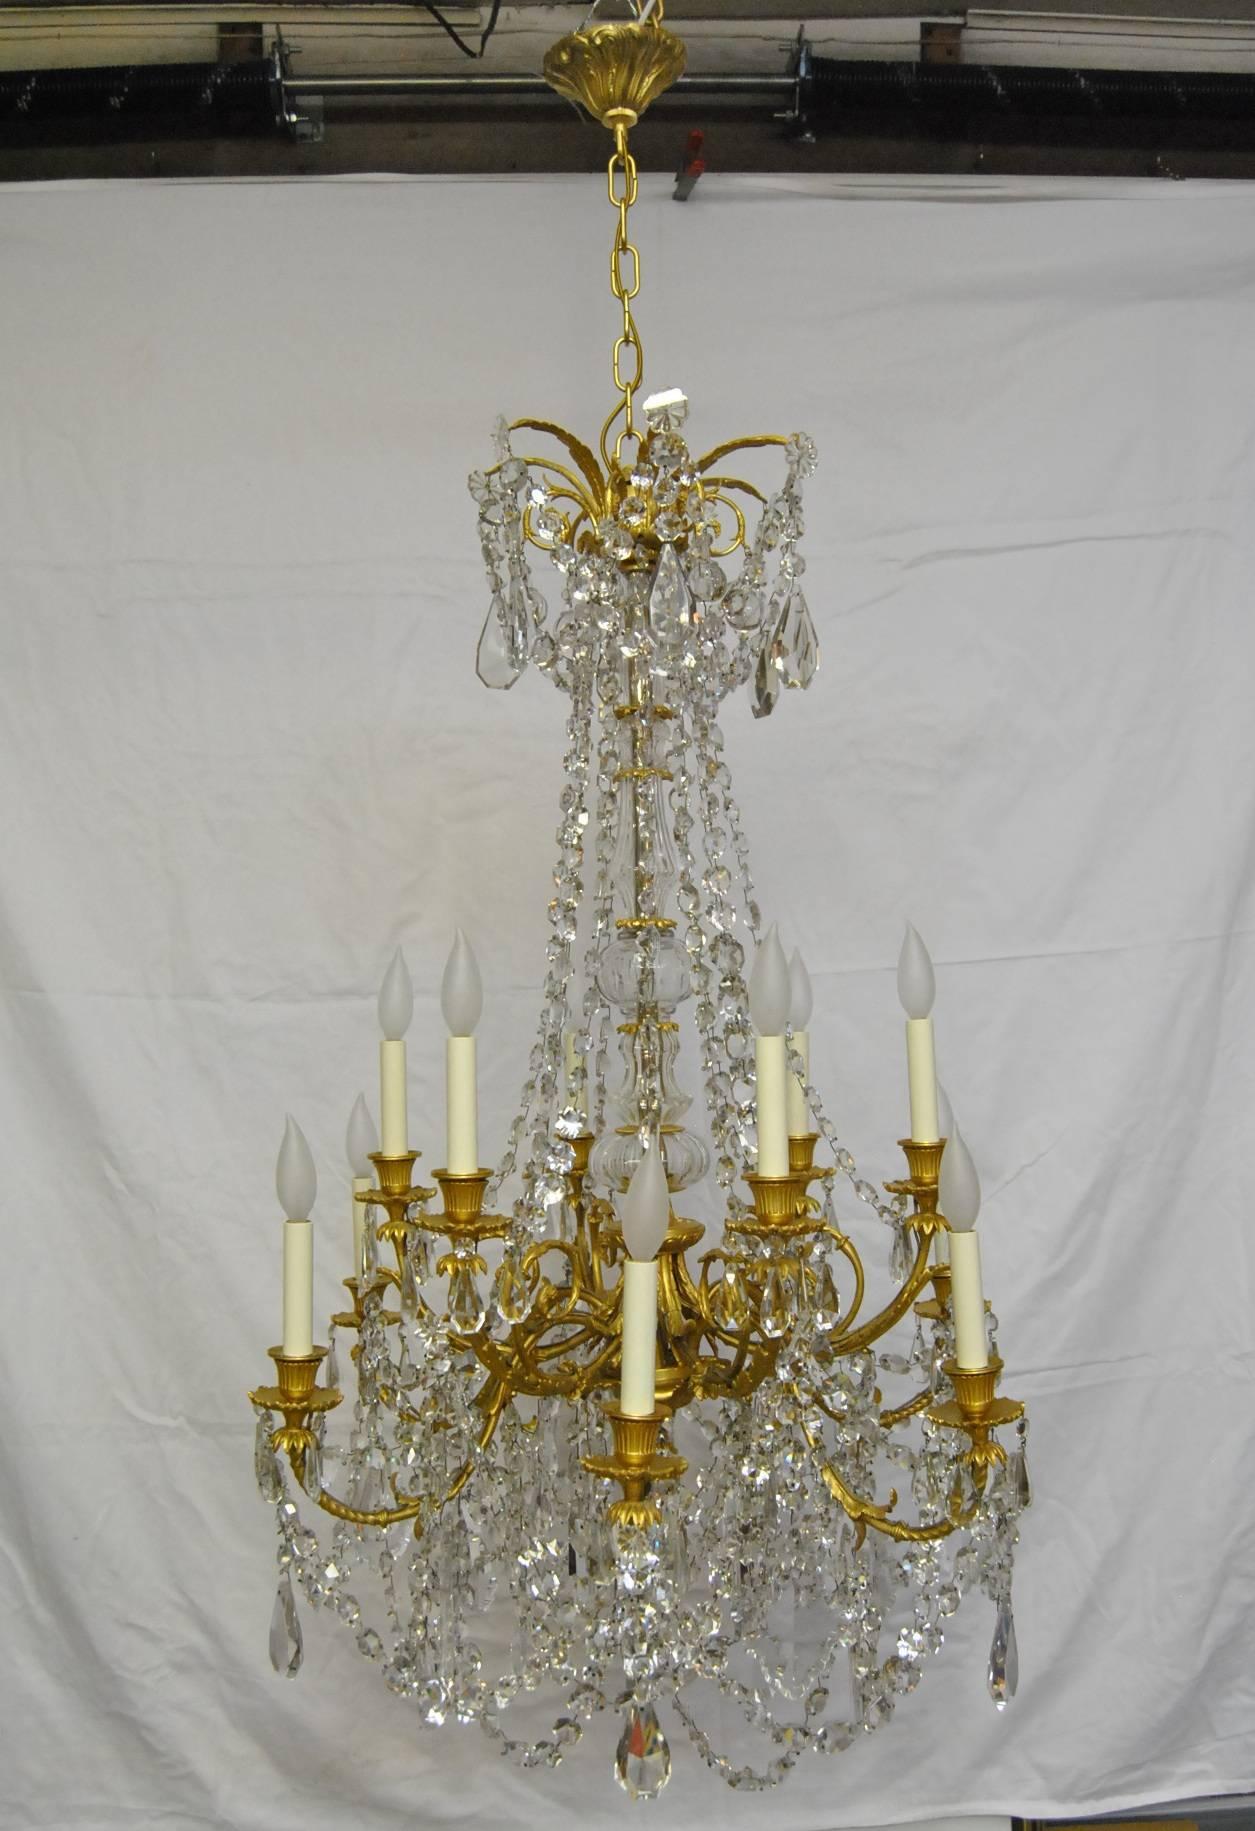 A gorgeous large scale French Empire crystal chandelier. The body of this chandelier is done in gilded bronze and has two layers of arms for a total of 12 arms. Arms are scrolled and hold various size crystals, some shaped. The center of the